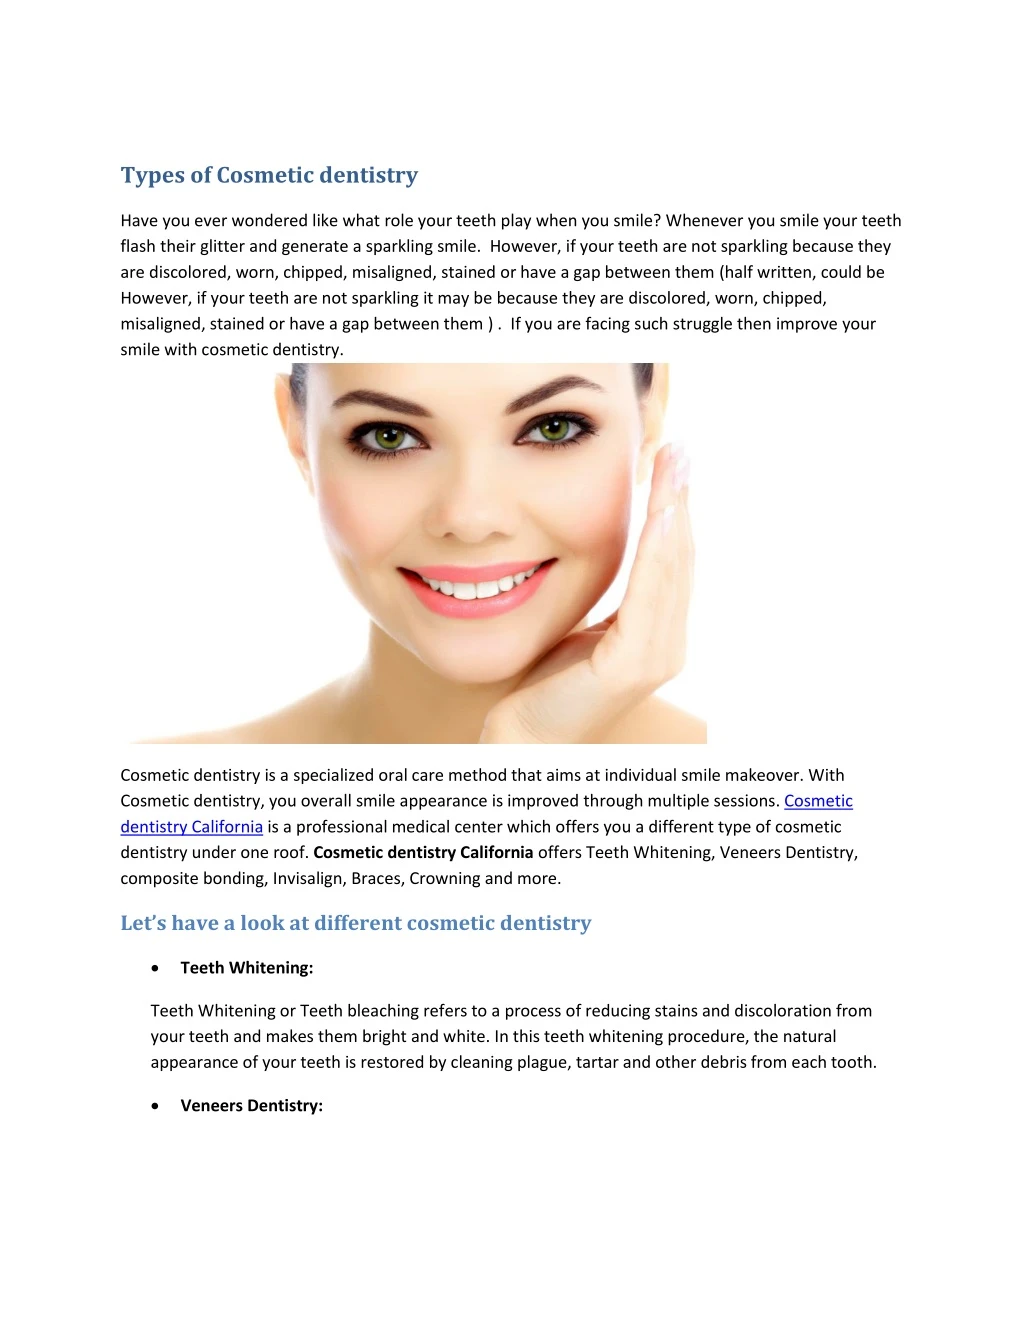 types of cosmetic dentistry